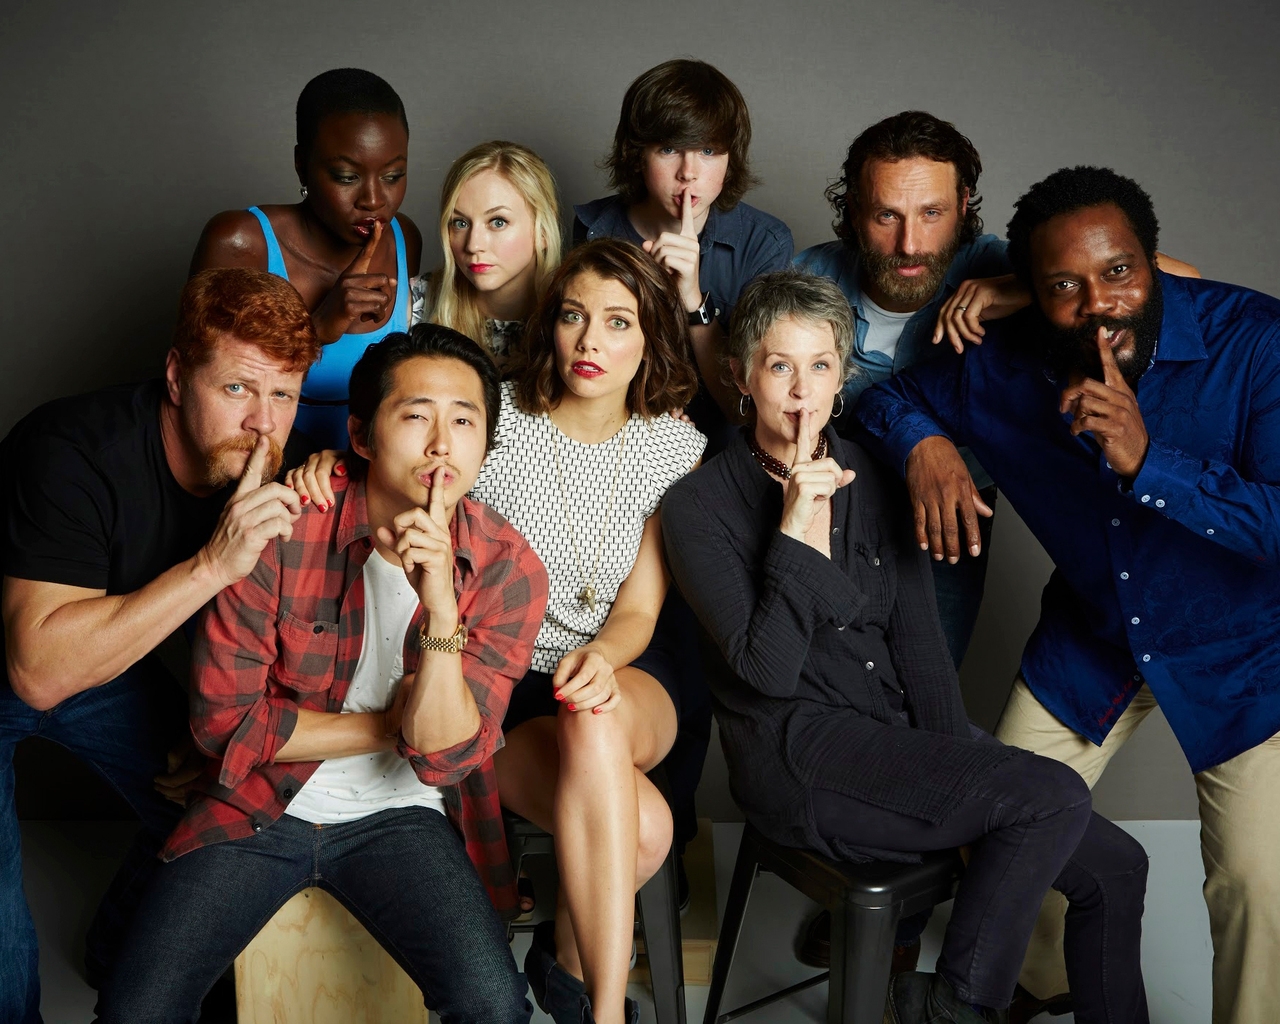 The Walking Dead Actors for 1280 x 1024 resolution